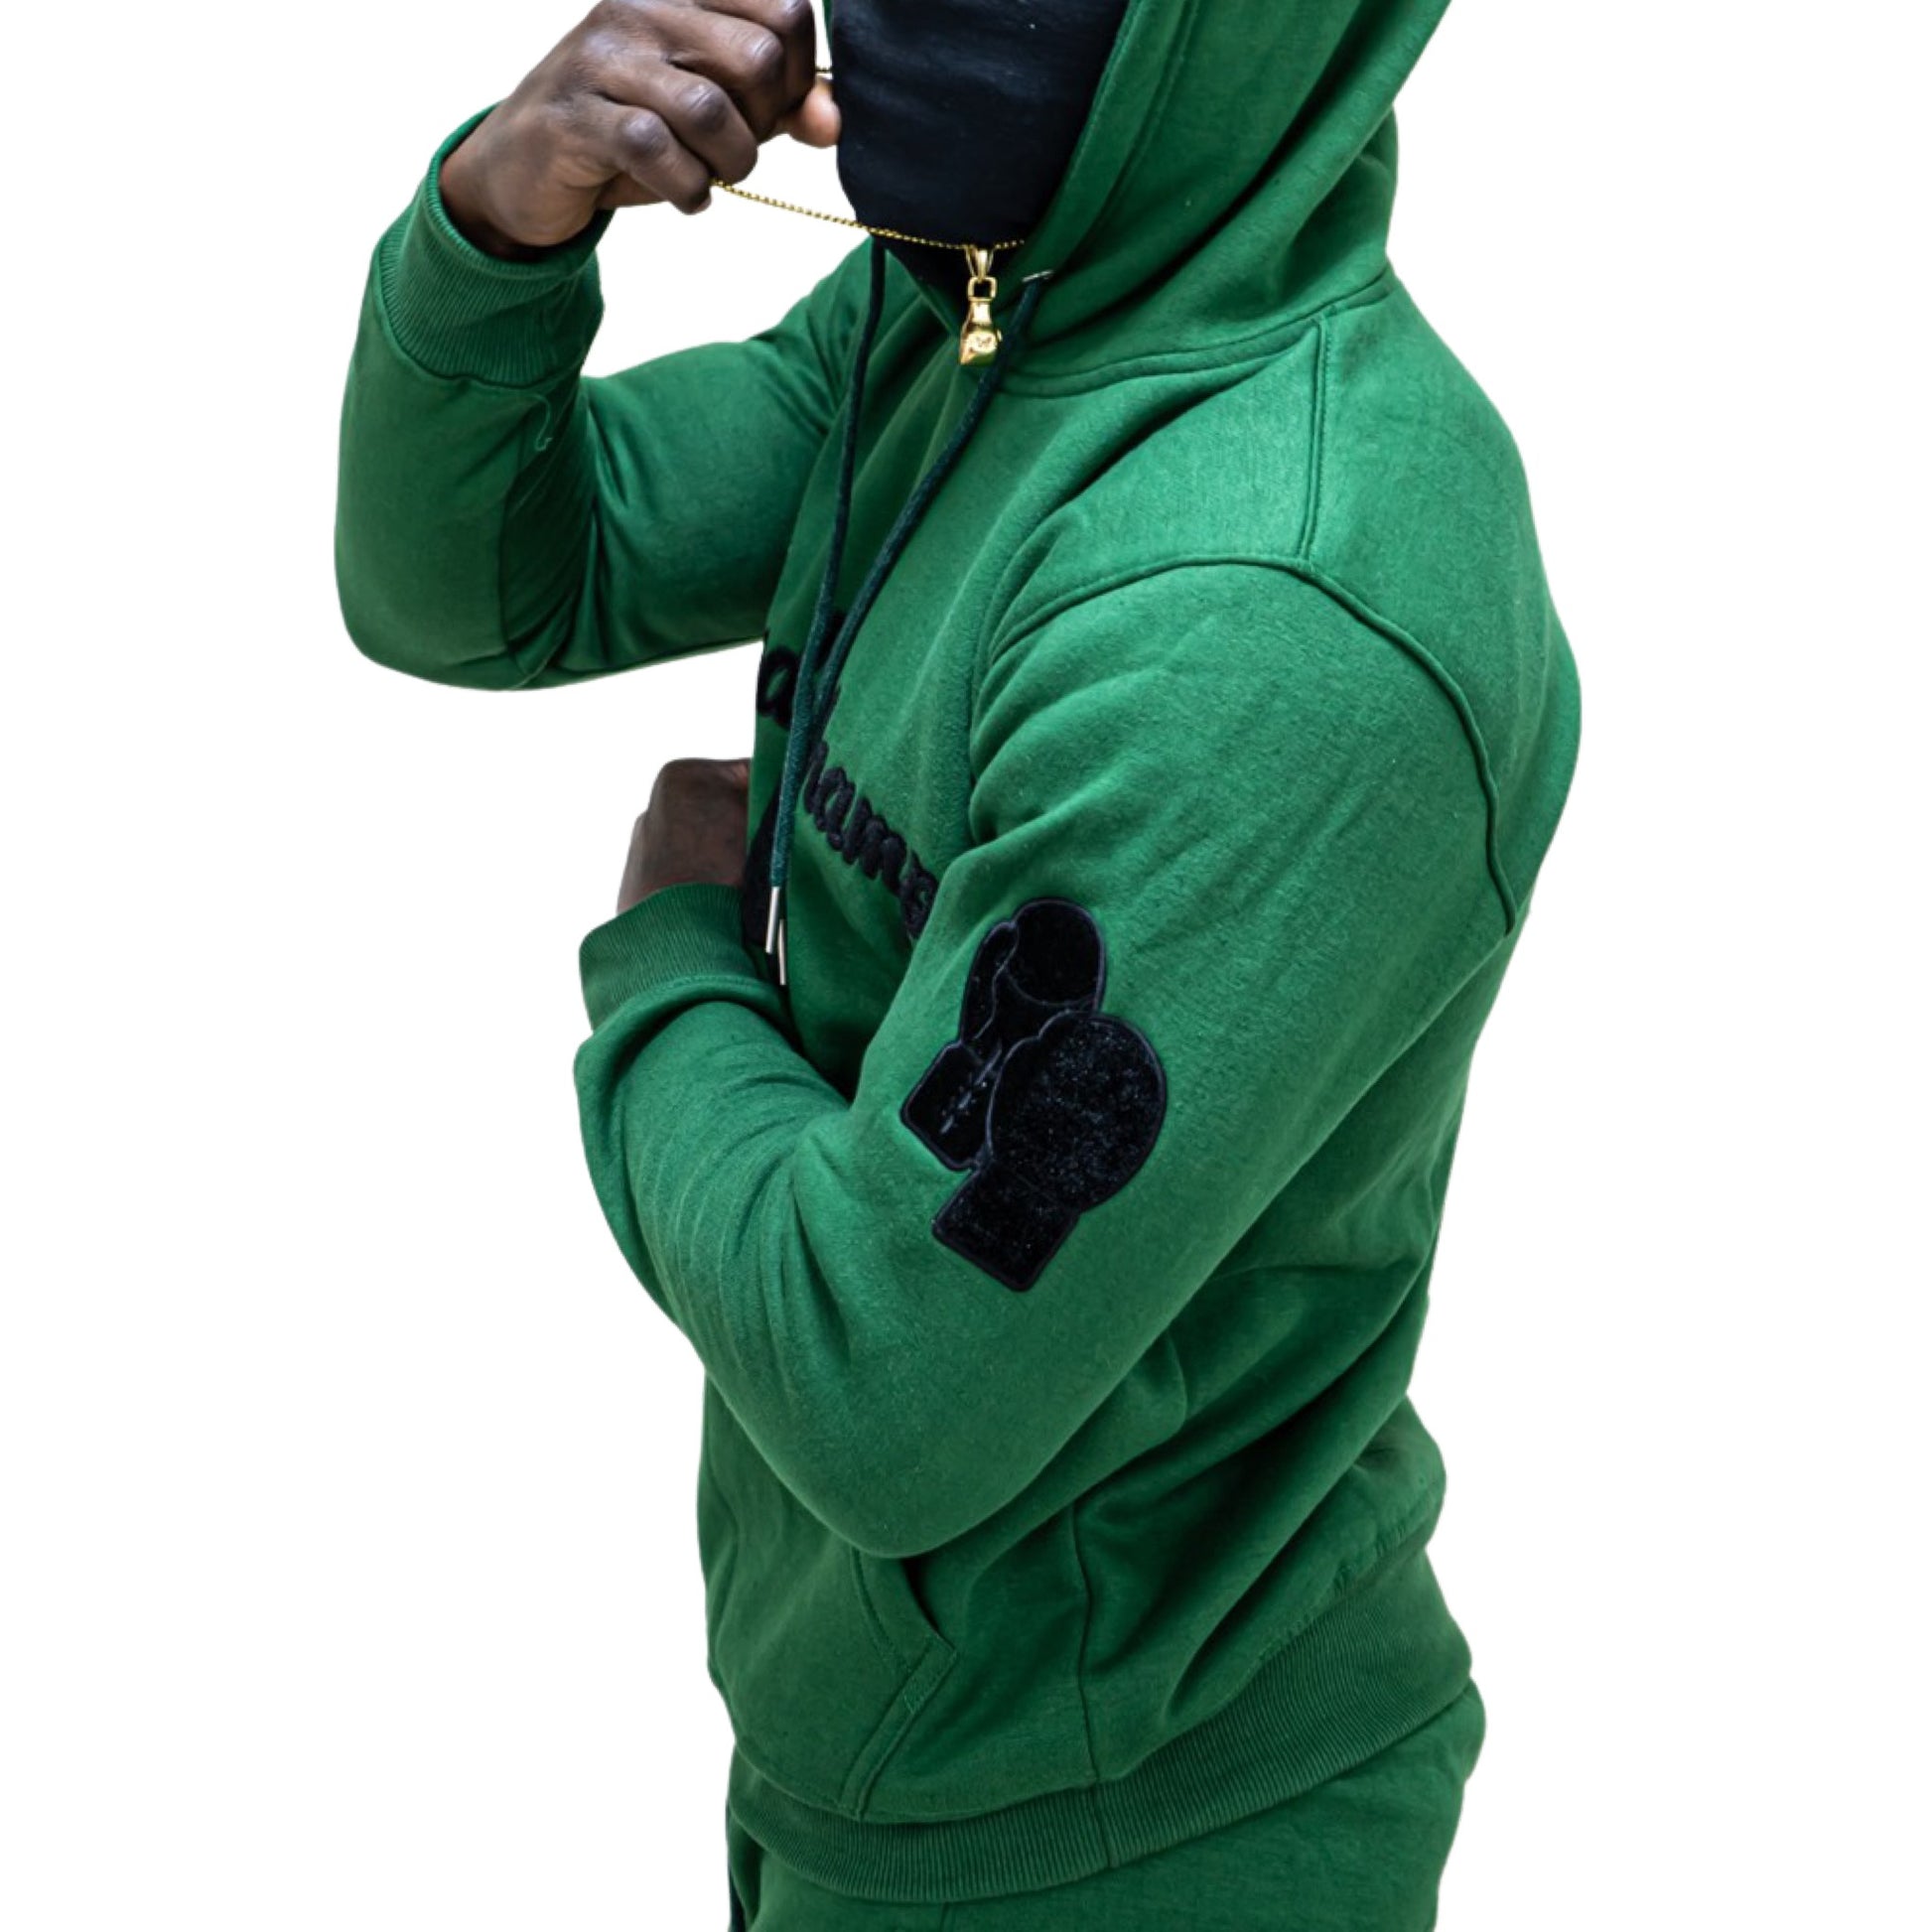 Royal Deluxe Green Tracksuit